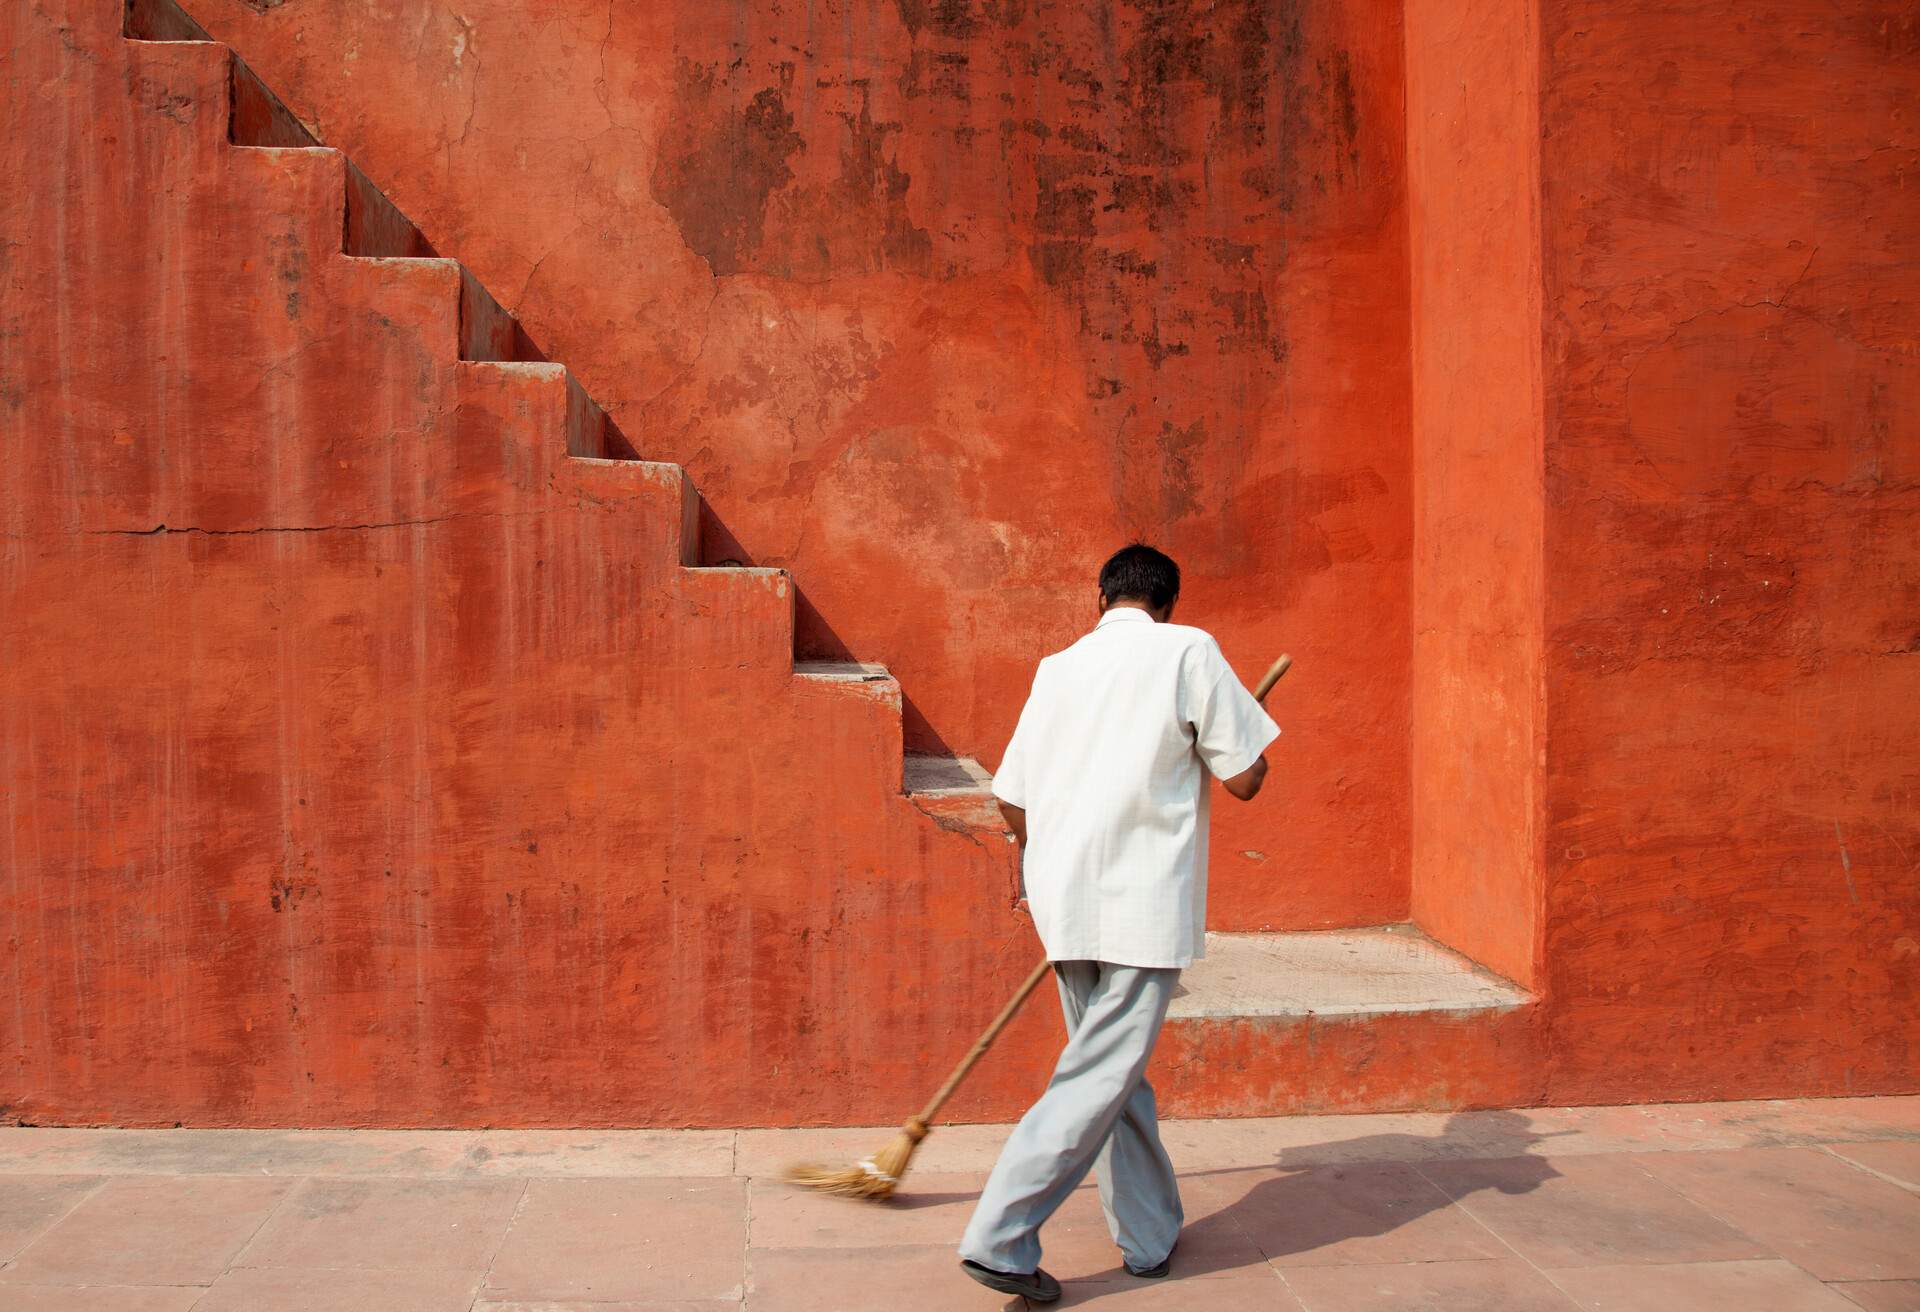 Man sweeping by stairs in Jaipur, India